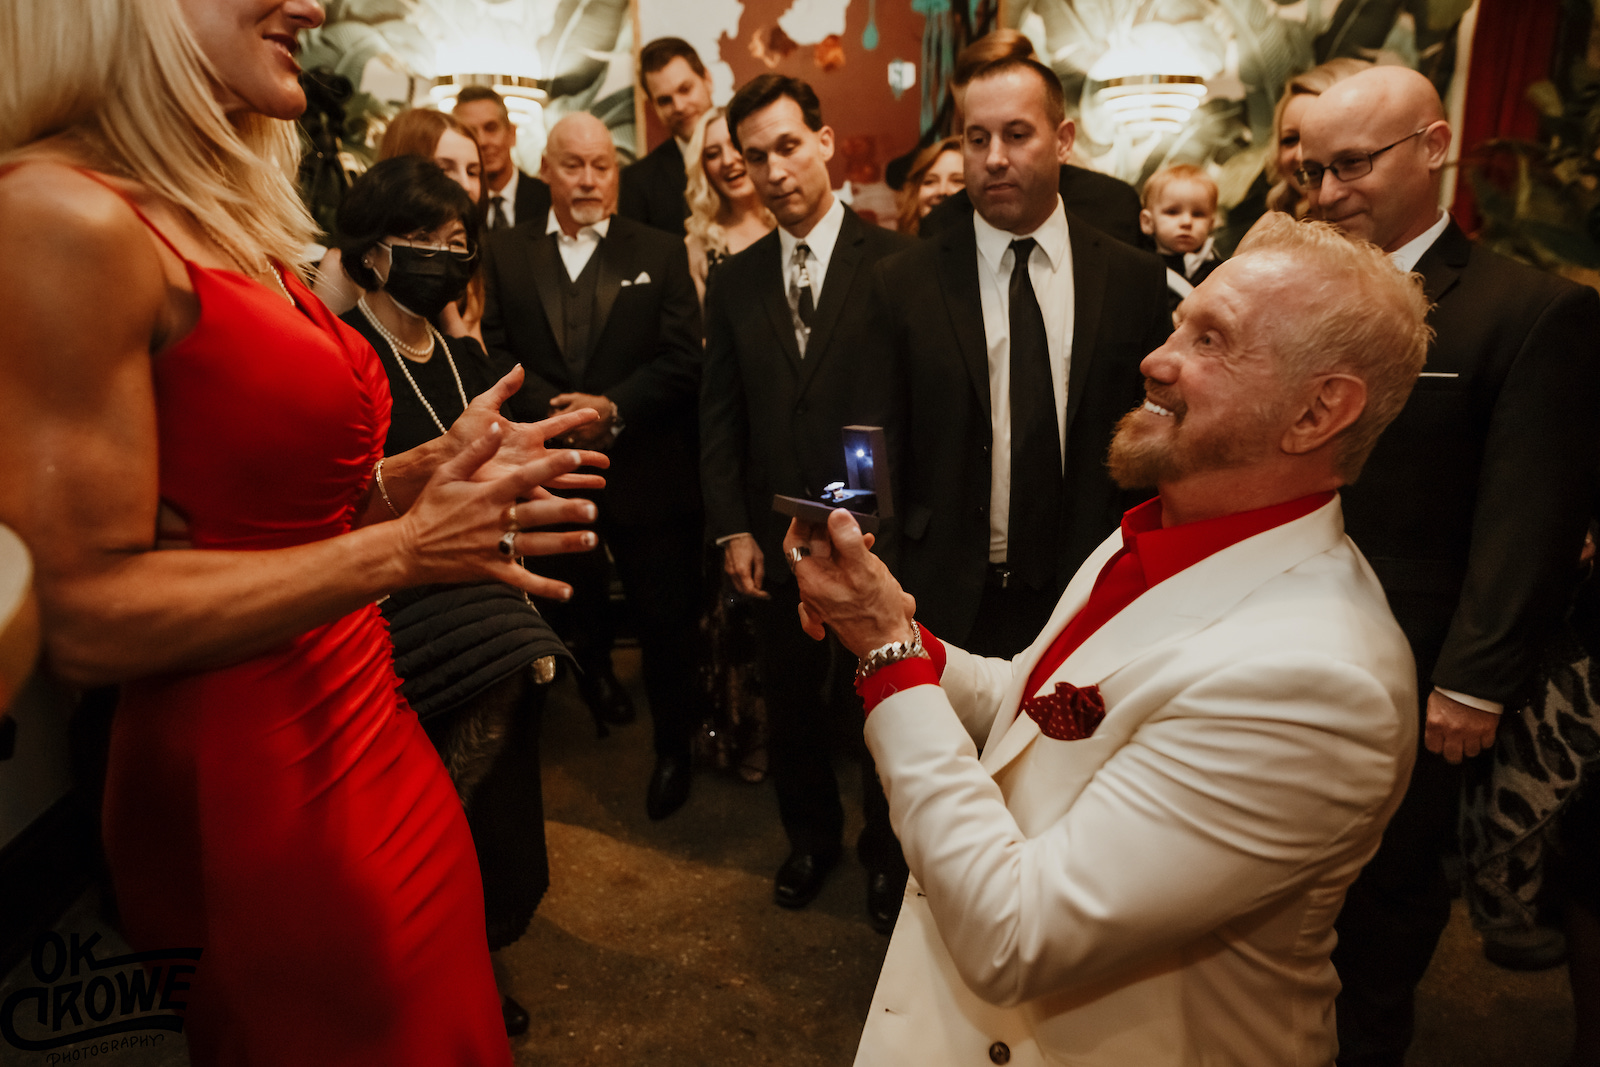 Diamond Dallas Page's surprise wedding proposal to Payge McMahon at The Dwell Hotel in downtown Chattanooga